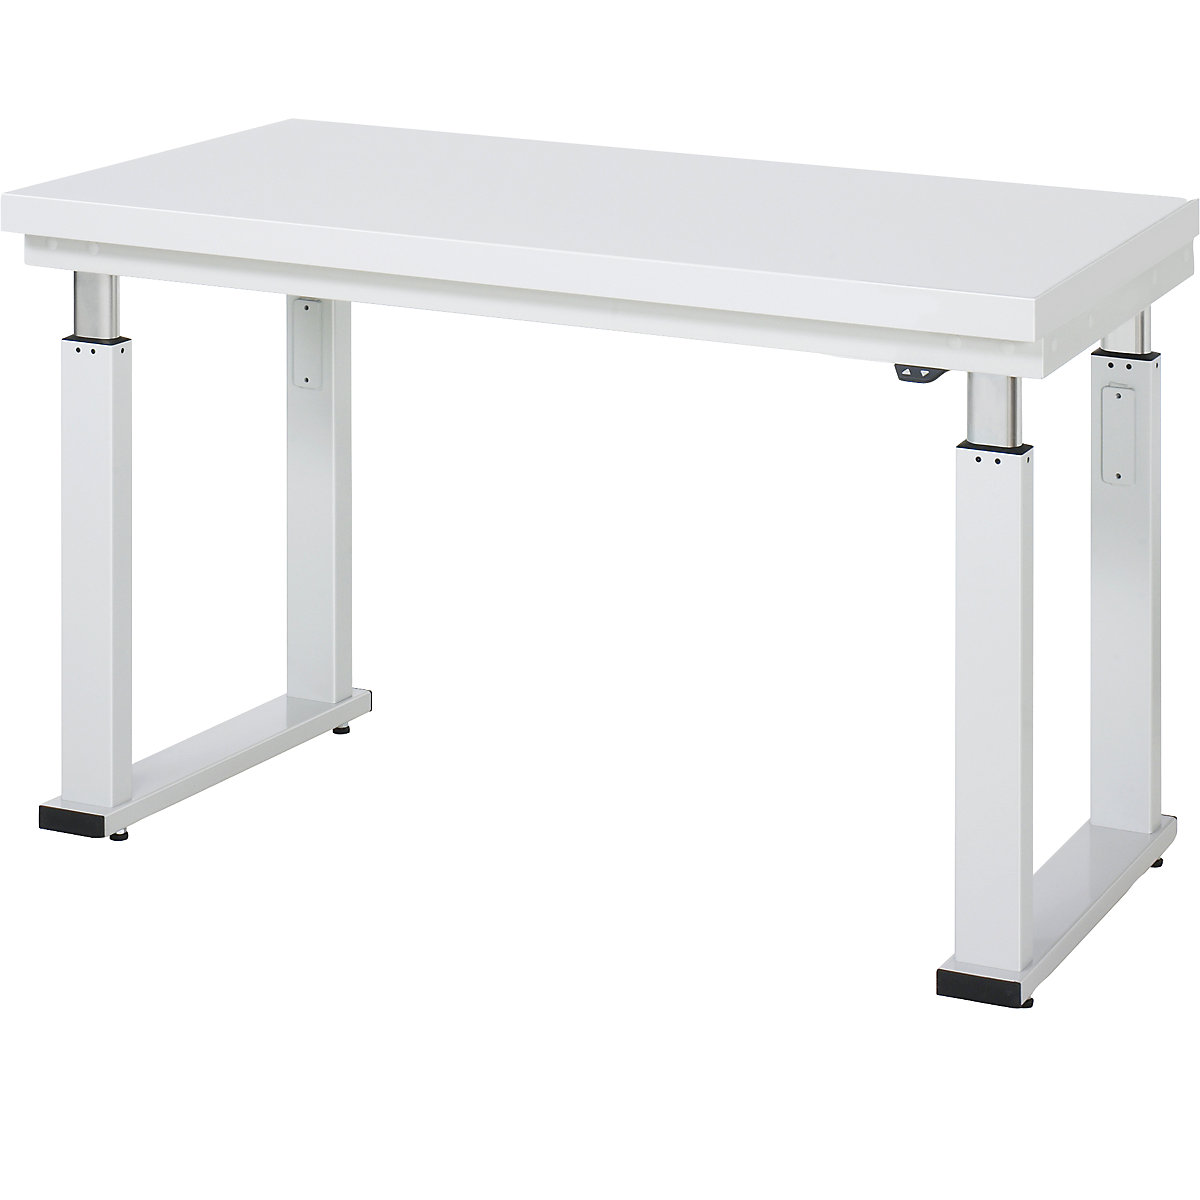 Work table, electric height adjustment – RAU, hardened laminate worktop, max. load 600 kg, WxD 1250 x 700 mm-17